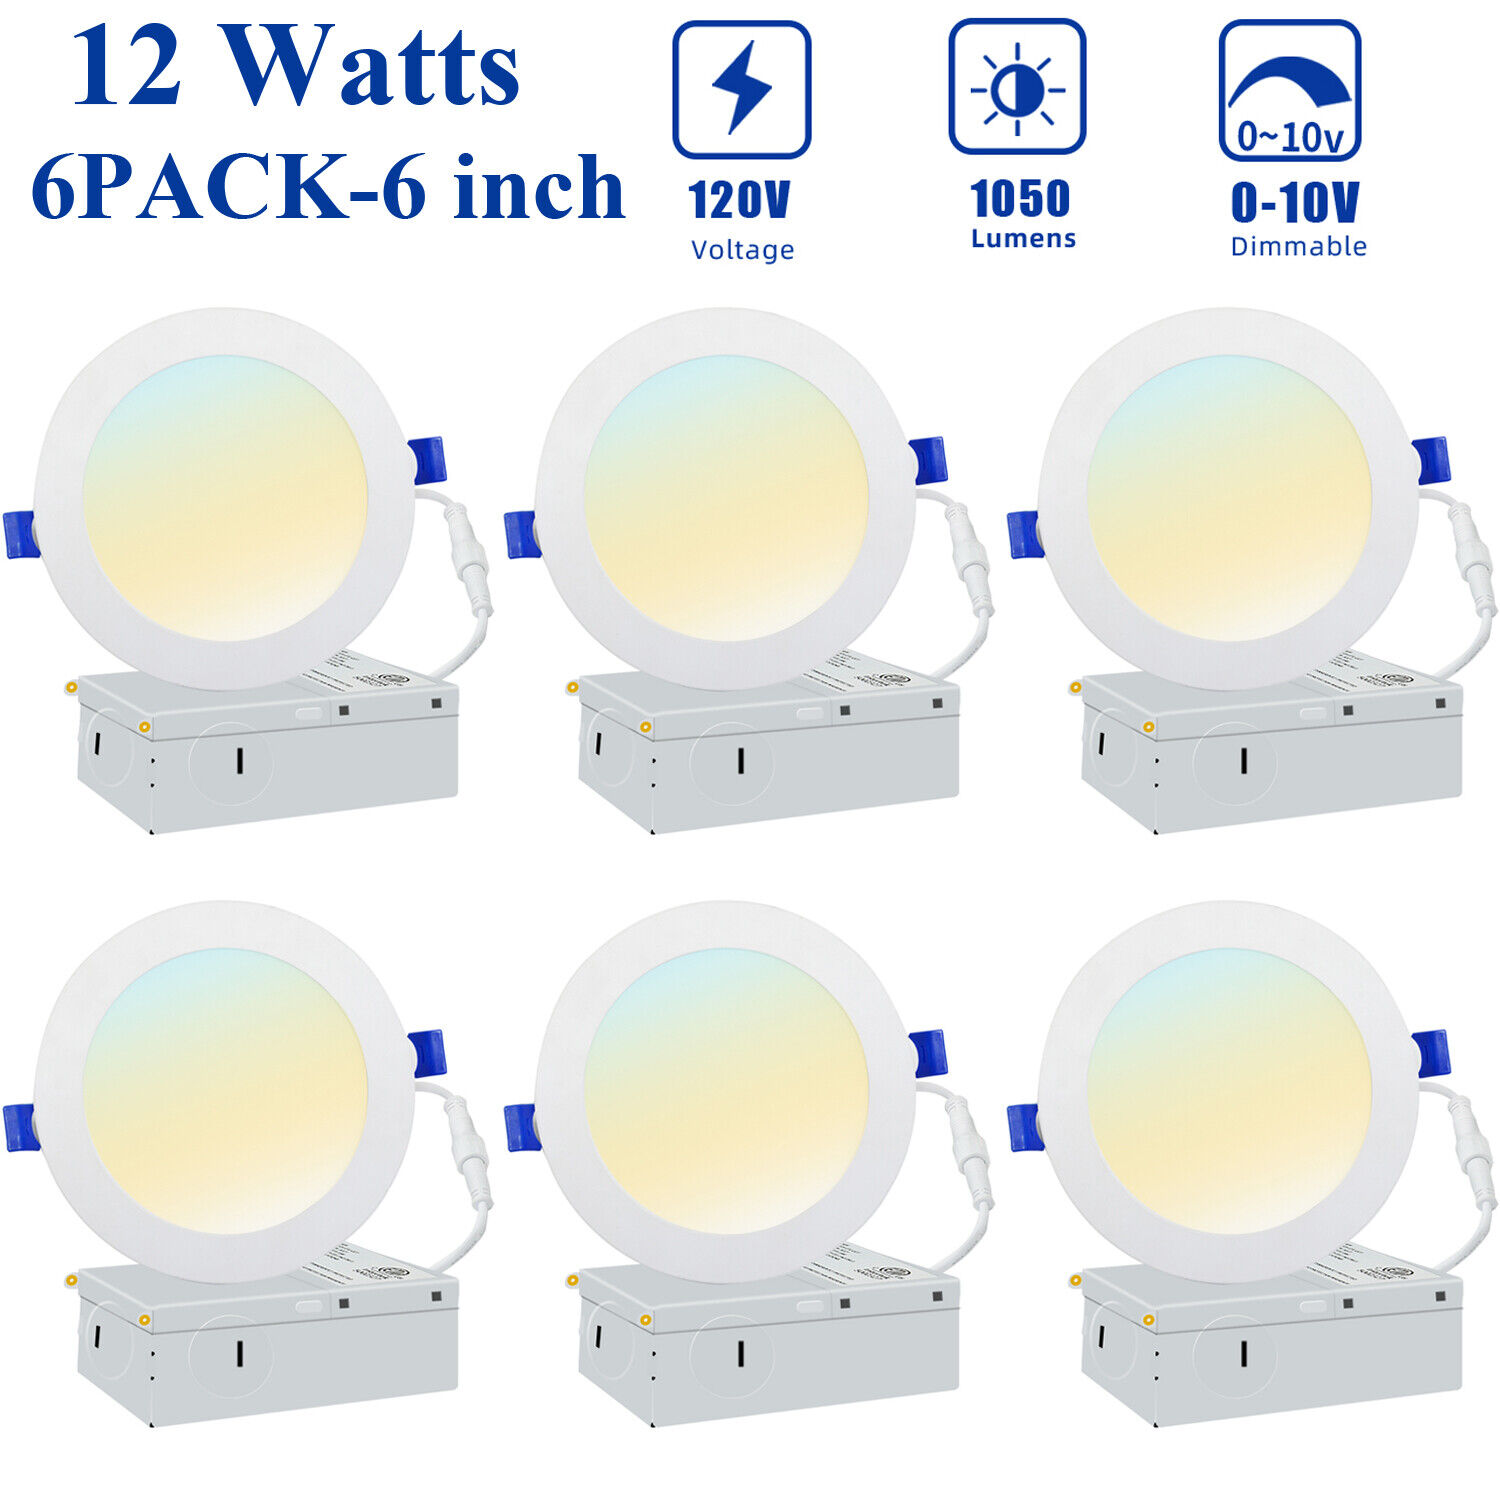 6 Inch Edge Lit Recessed LED Lights - 12W - 1050 Lumens  - 3CCT White - Dimmable